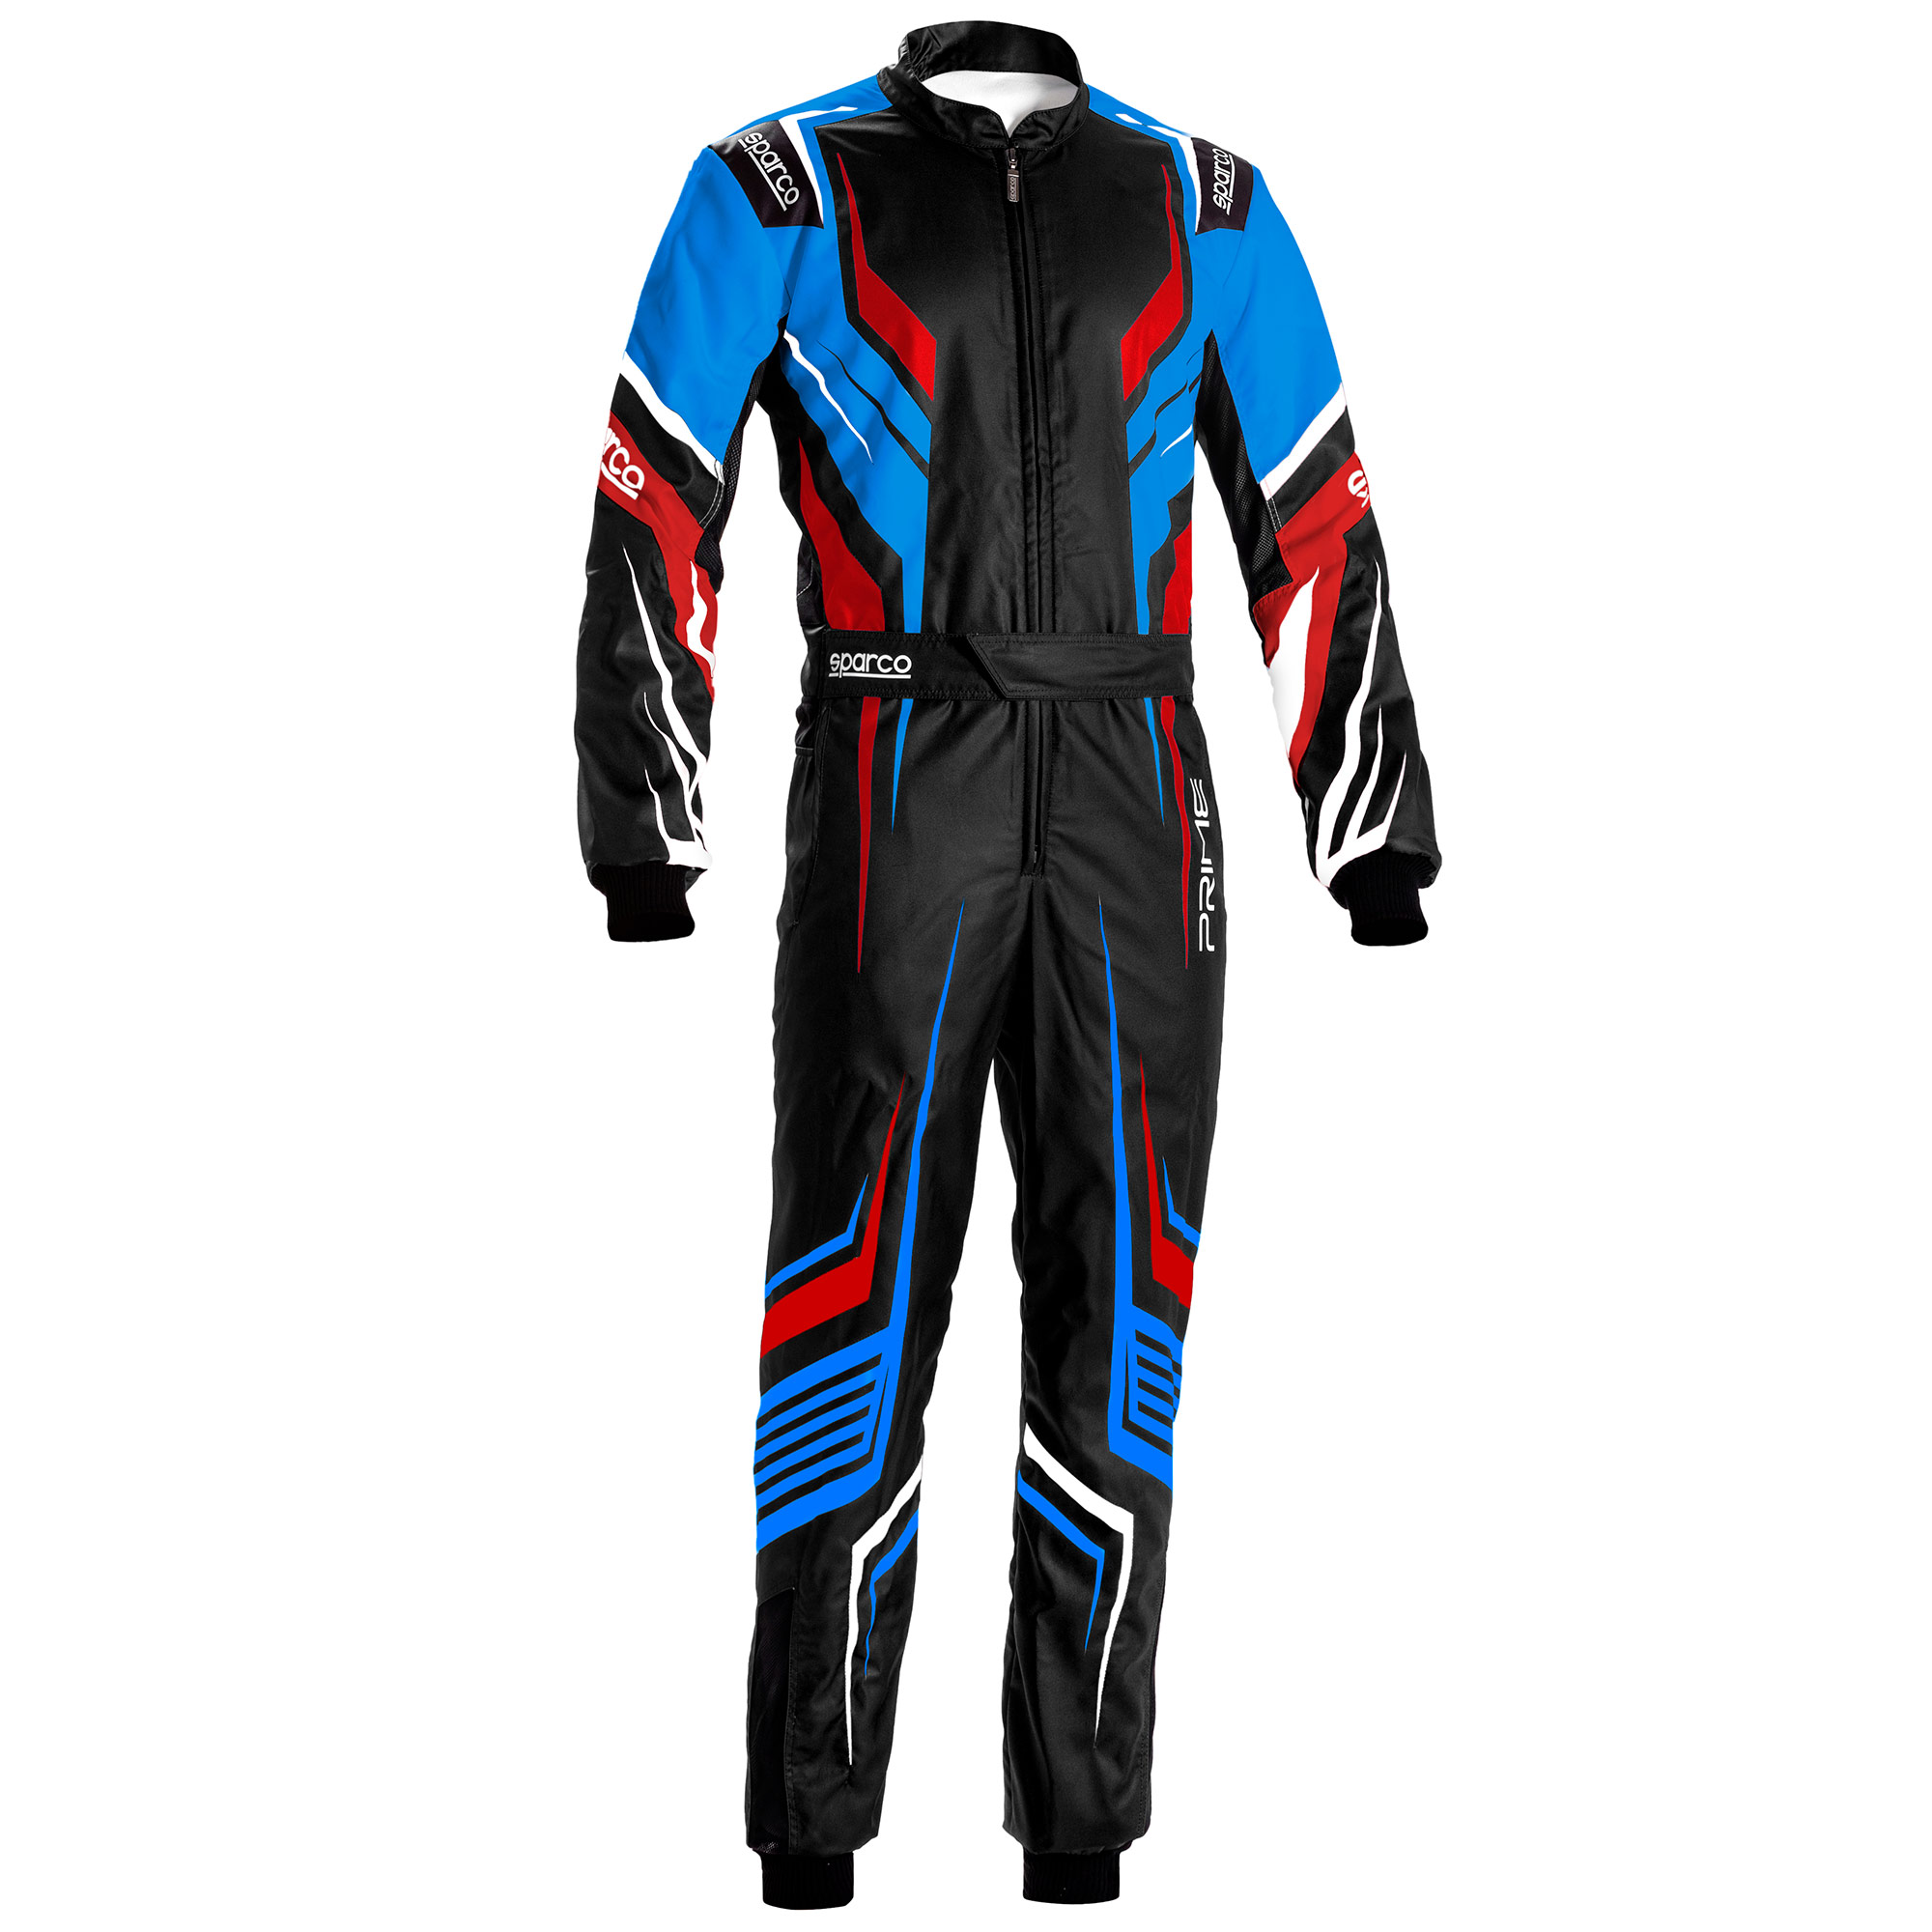 KART REPUBLIC GO KART RACE SUIT CIK/FIA LEVEL2 APPROVED WITH FREE GIFTS INCLUDED 